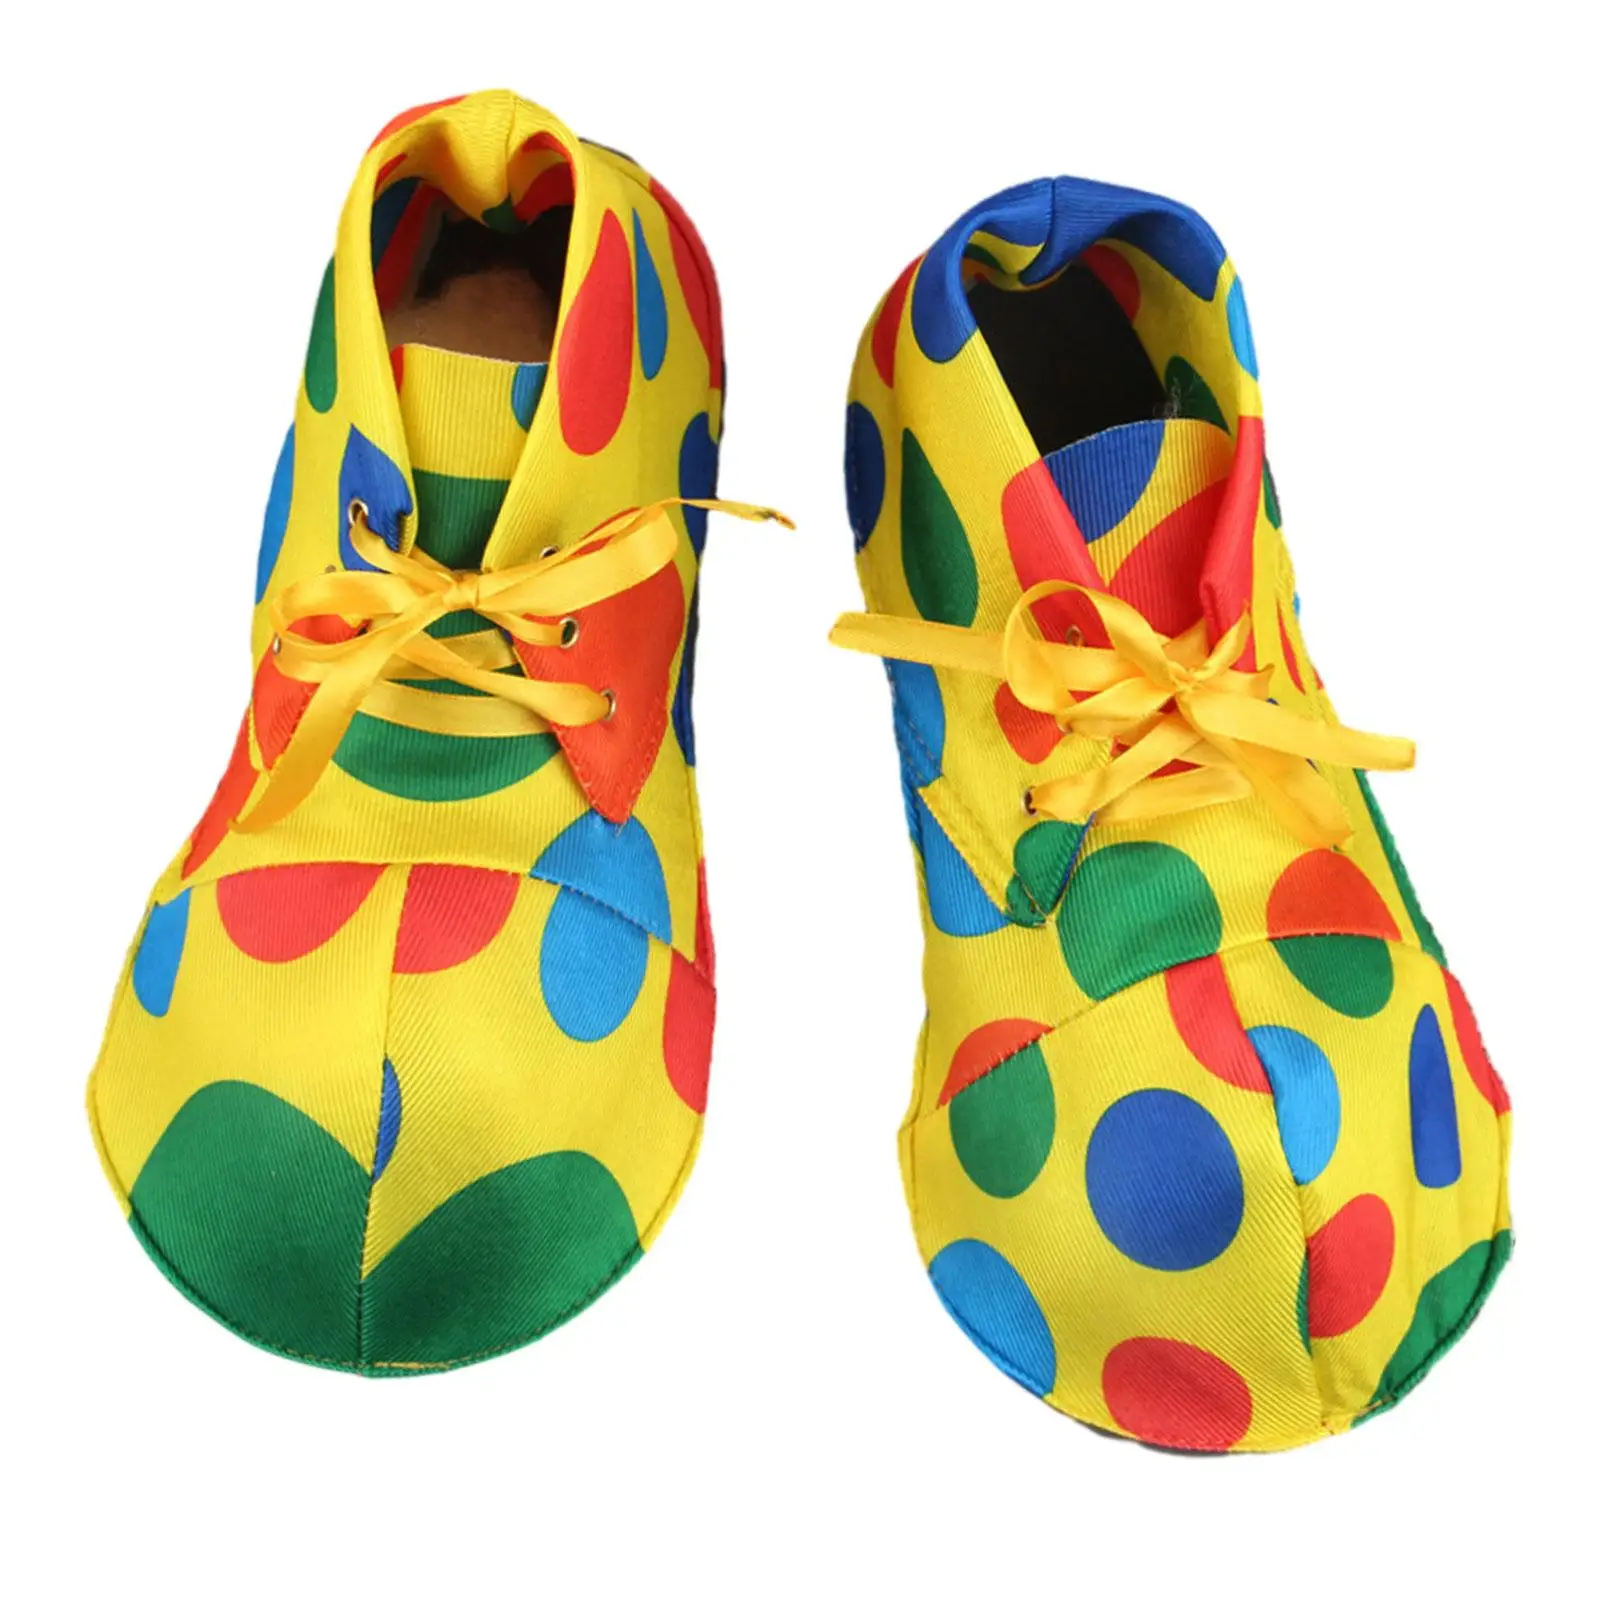 Adult Clown Shoes Christmas Elves Shoes Xmas PU Leather Christmas Party Costume